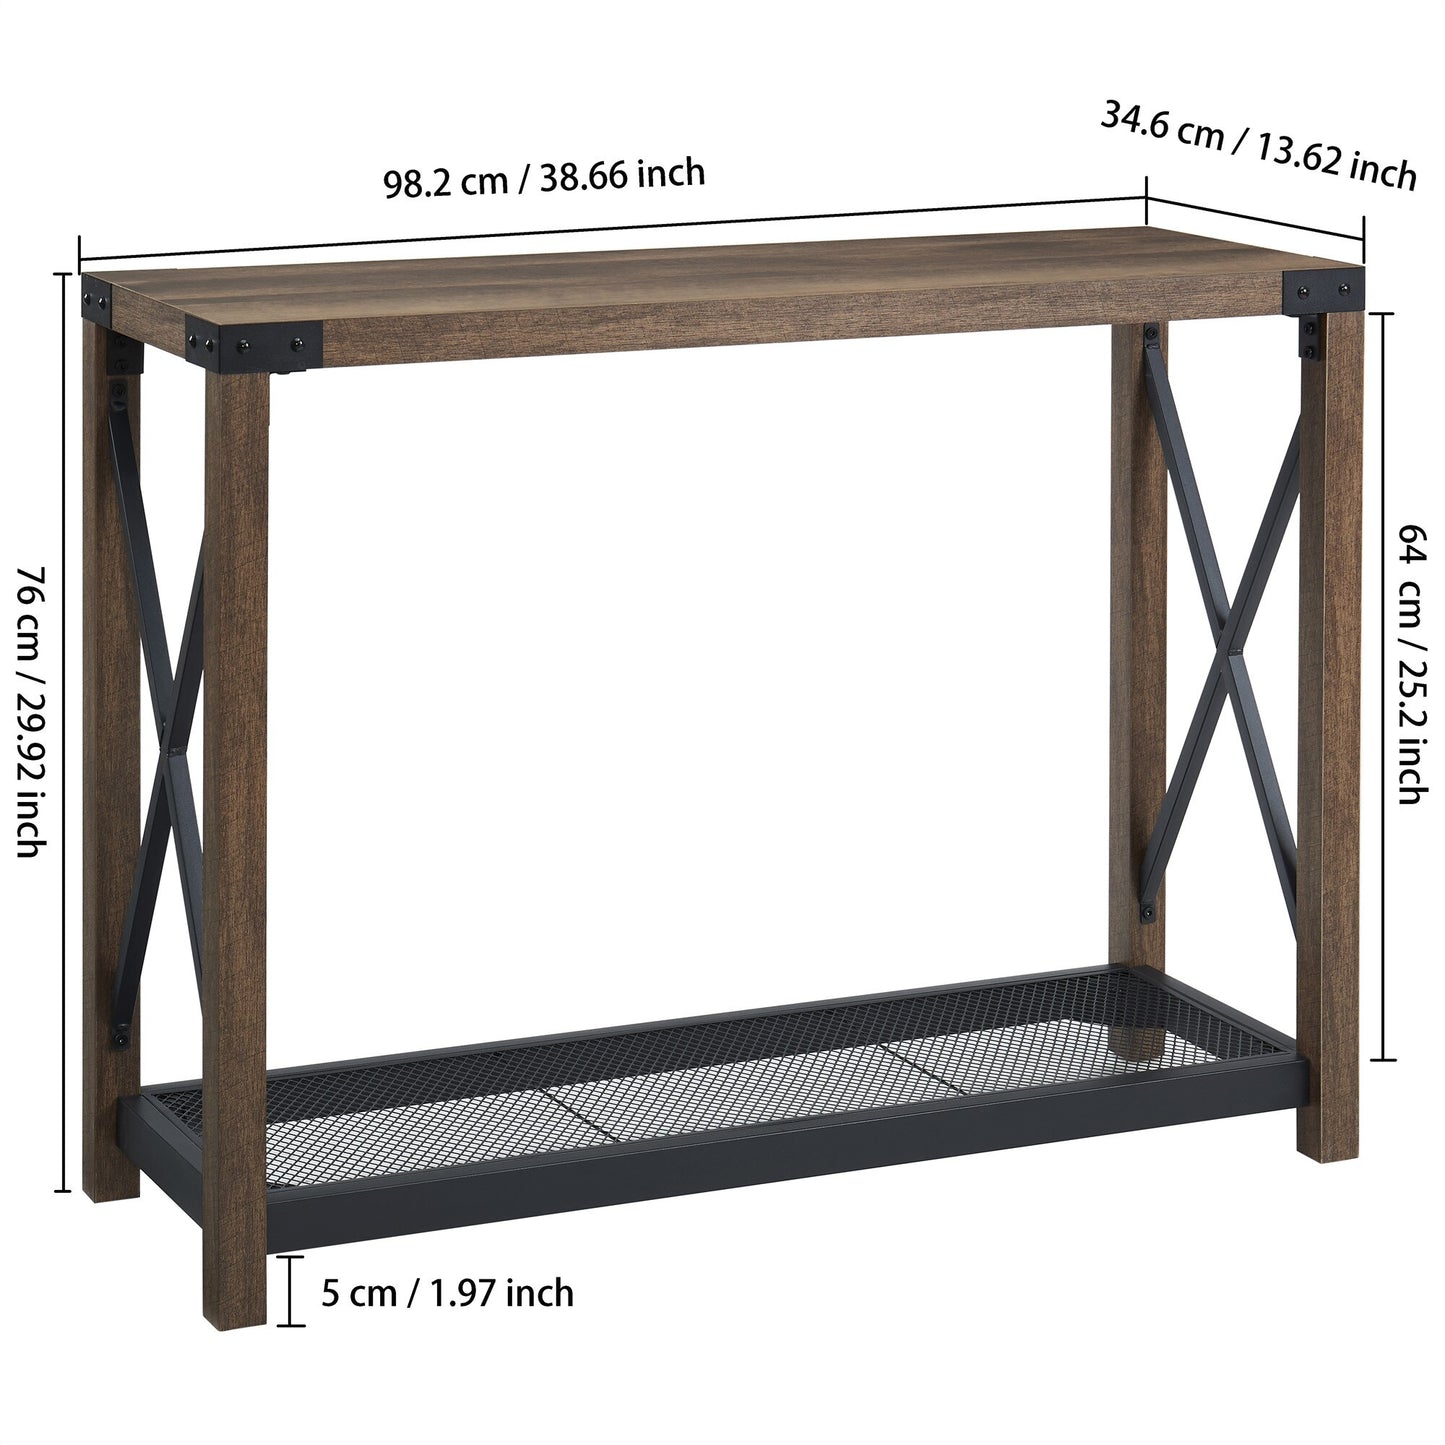 Farmhouse Entry Table Industrial Sofa Table - 2 Tier Console Table for Entryway and Living Room, Brown/Grey Easy Assembly Furniture